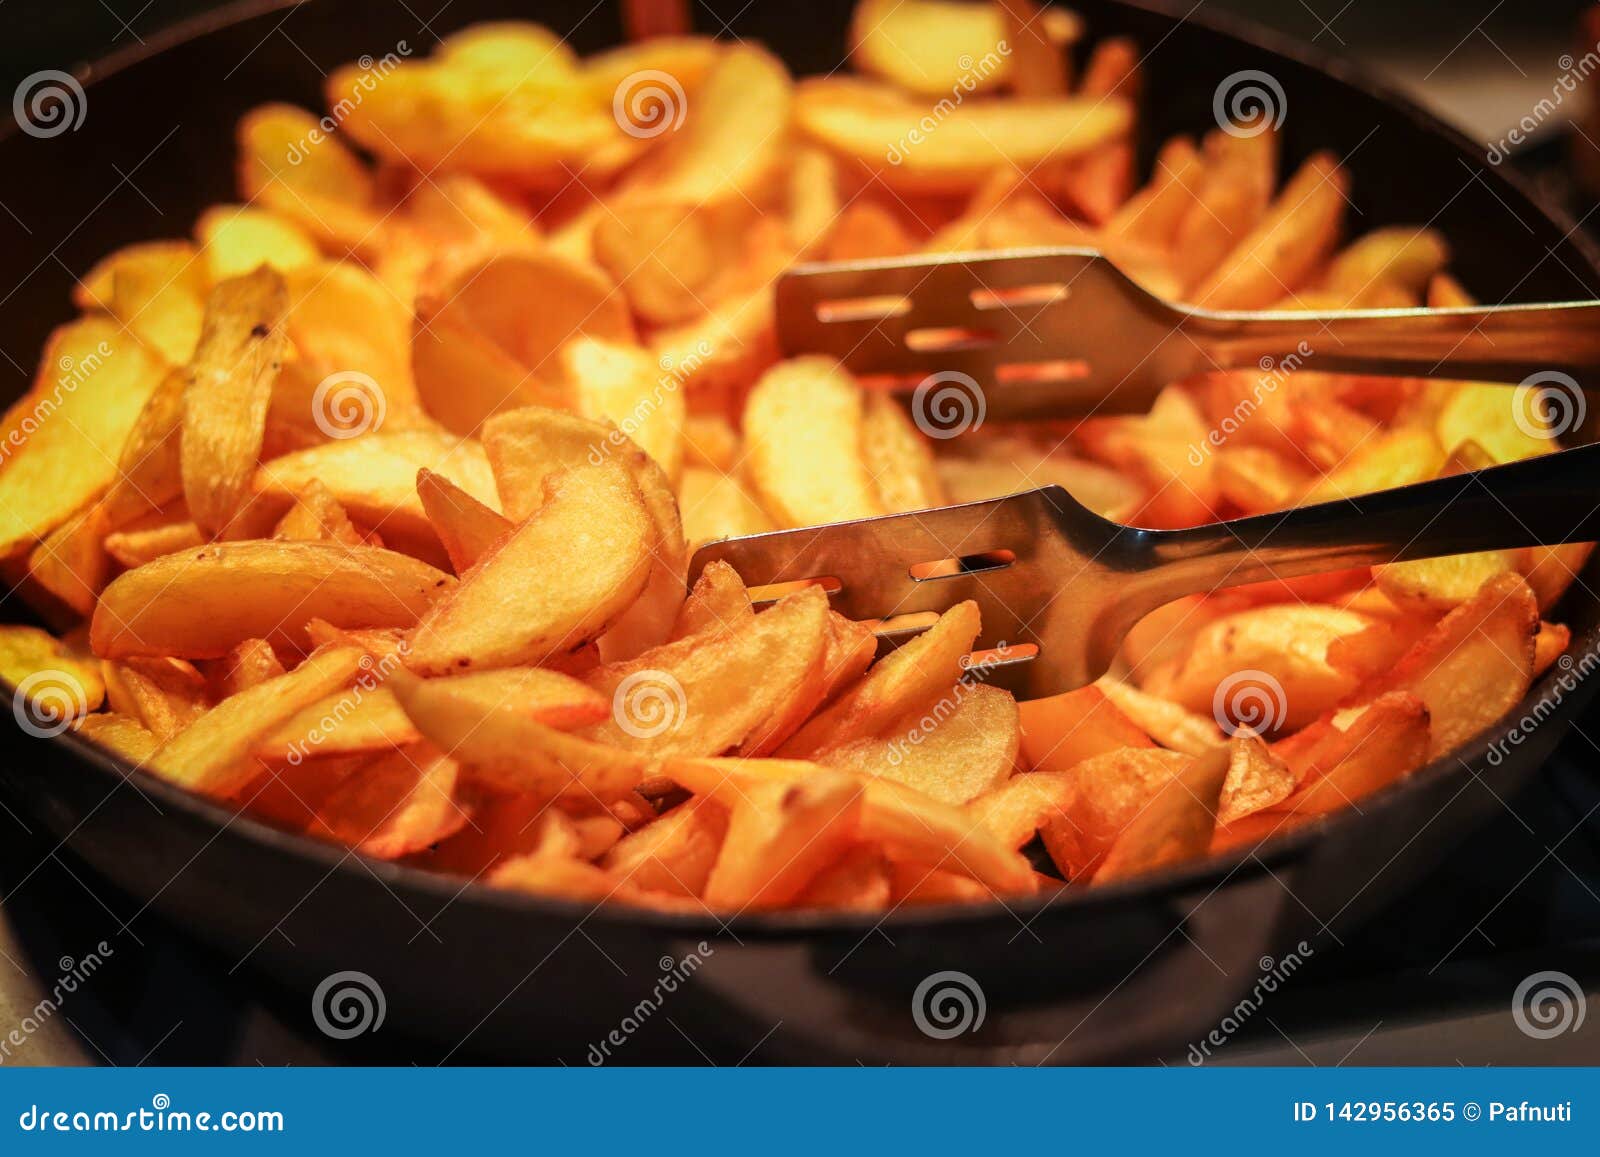 Tasty crispy fried wedges of potato served in an old metal skillet in a close up wide angle view